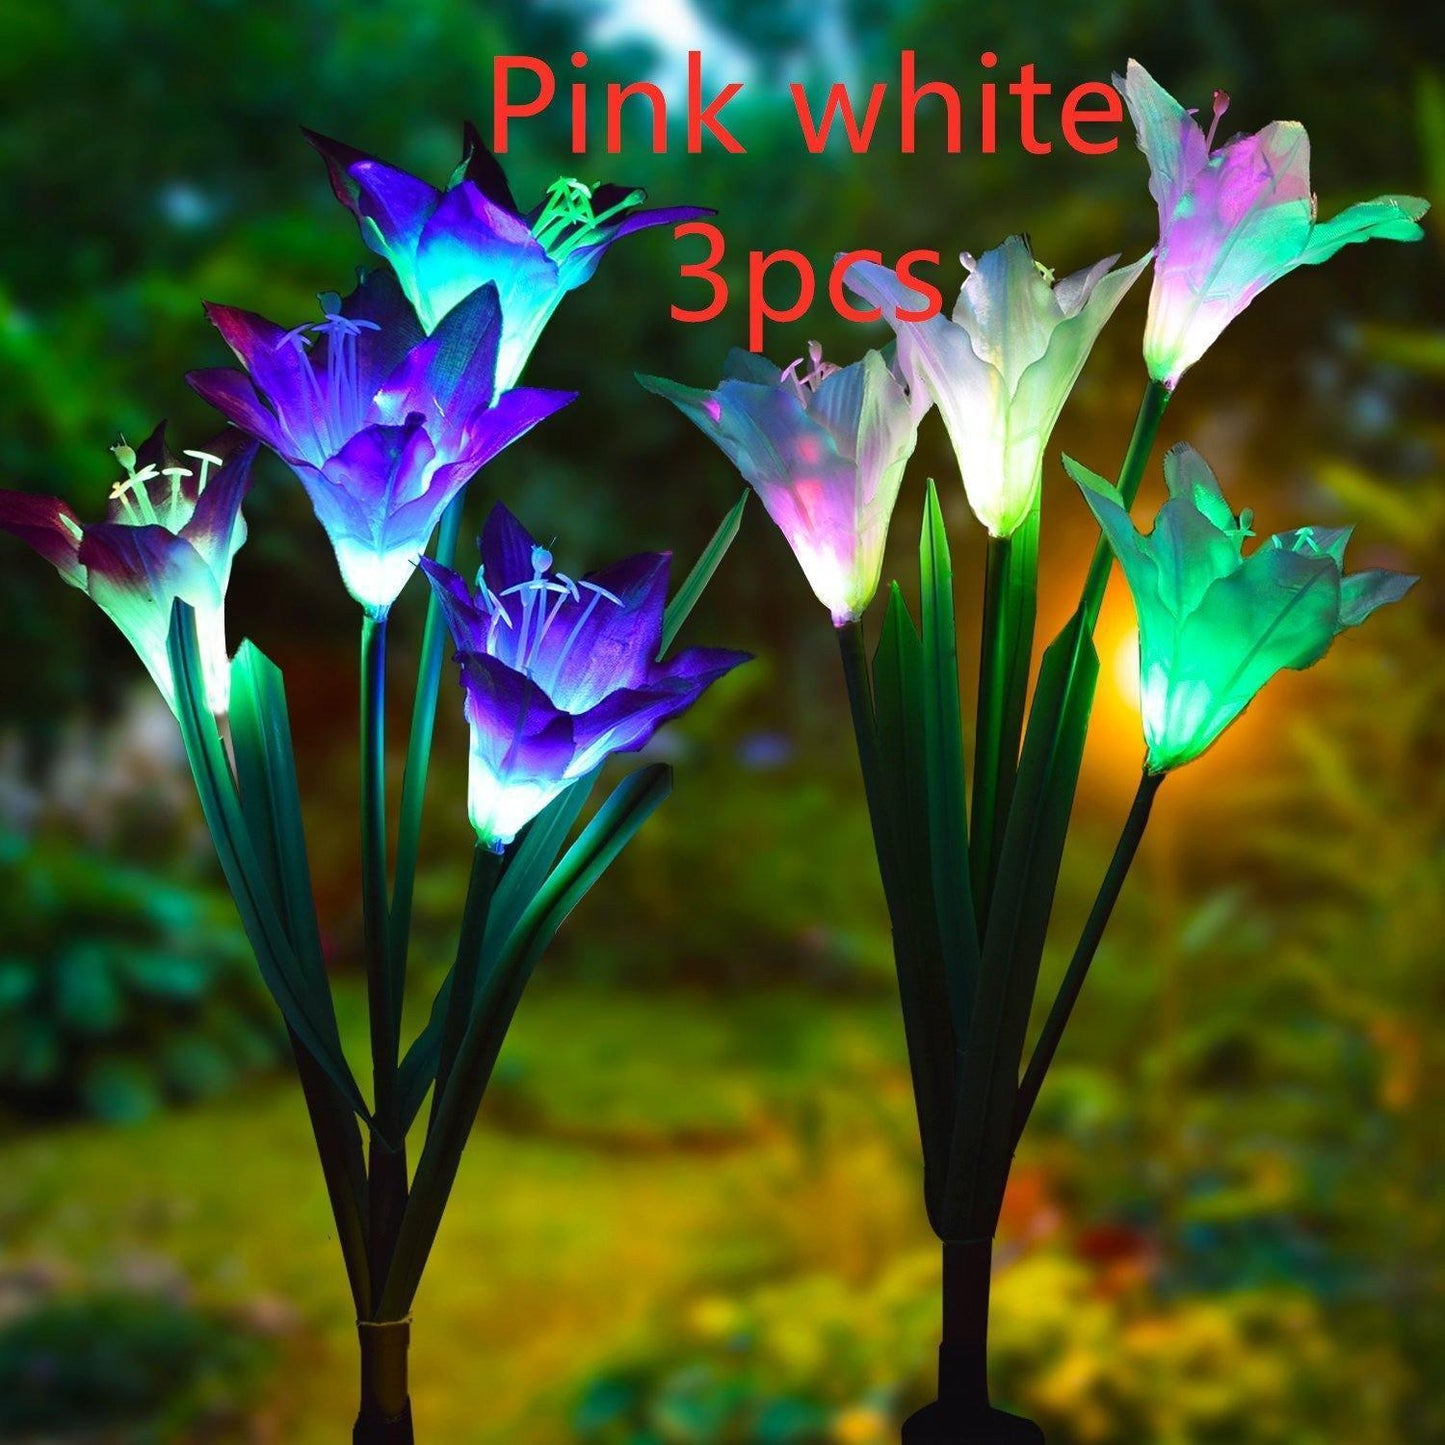 ezy2find Solar Garden Light Pink white 3pcs Outdoor Solar Garden Light Waterproof 7 LED Colorful Color Lawn Light Lily Fairy Lights Christmas Decoration Patio Lighting